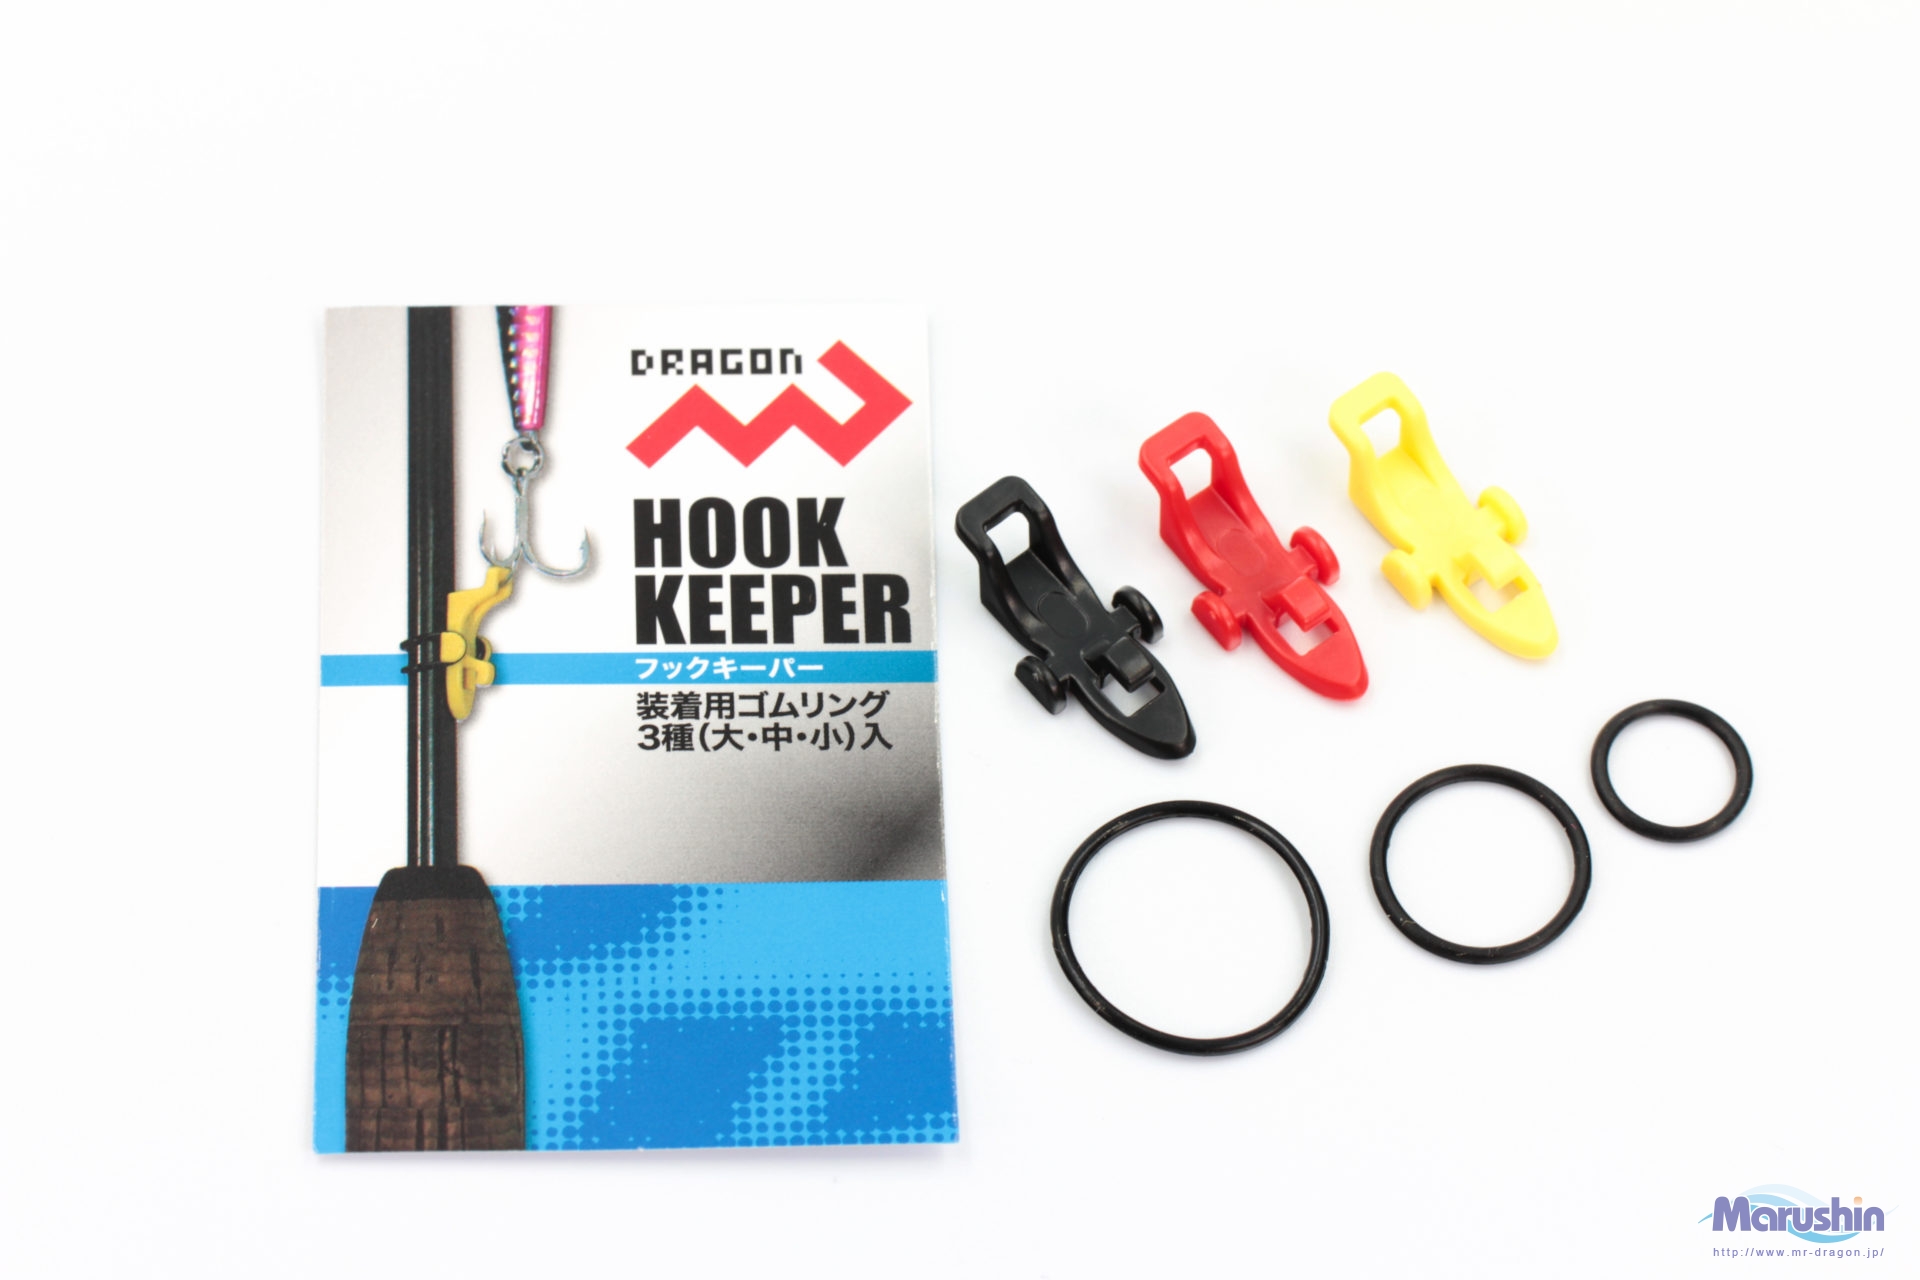 Hook keeper (black, red, yellow) image